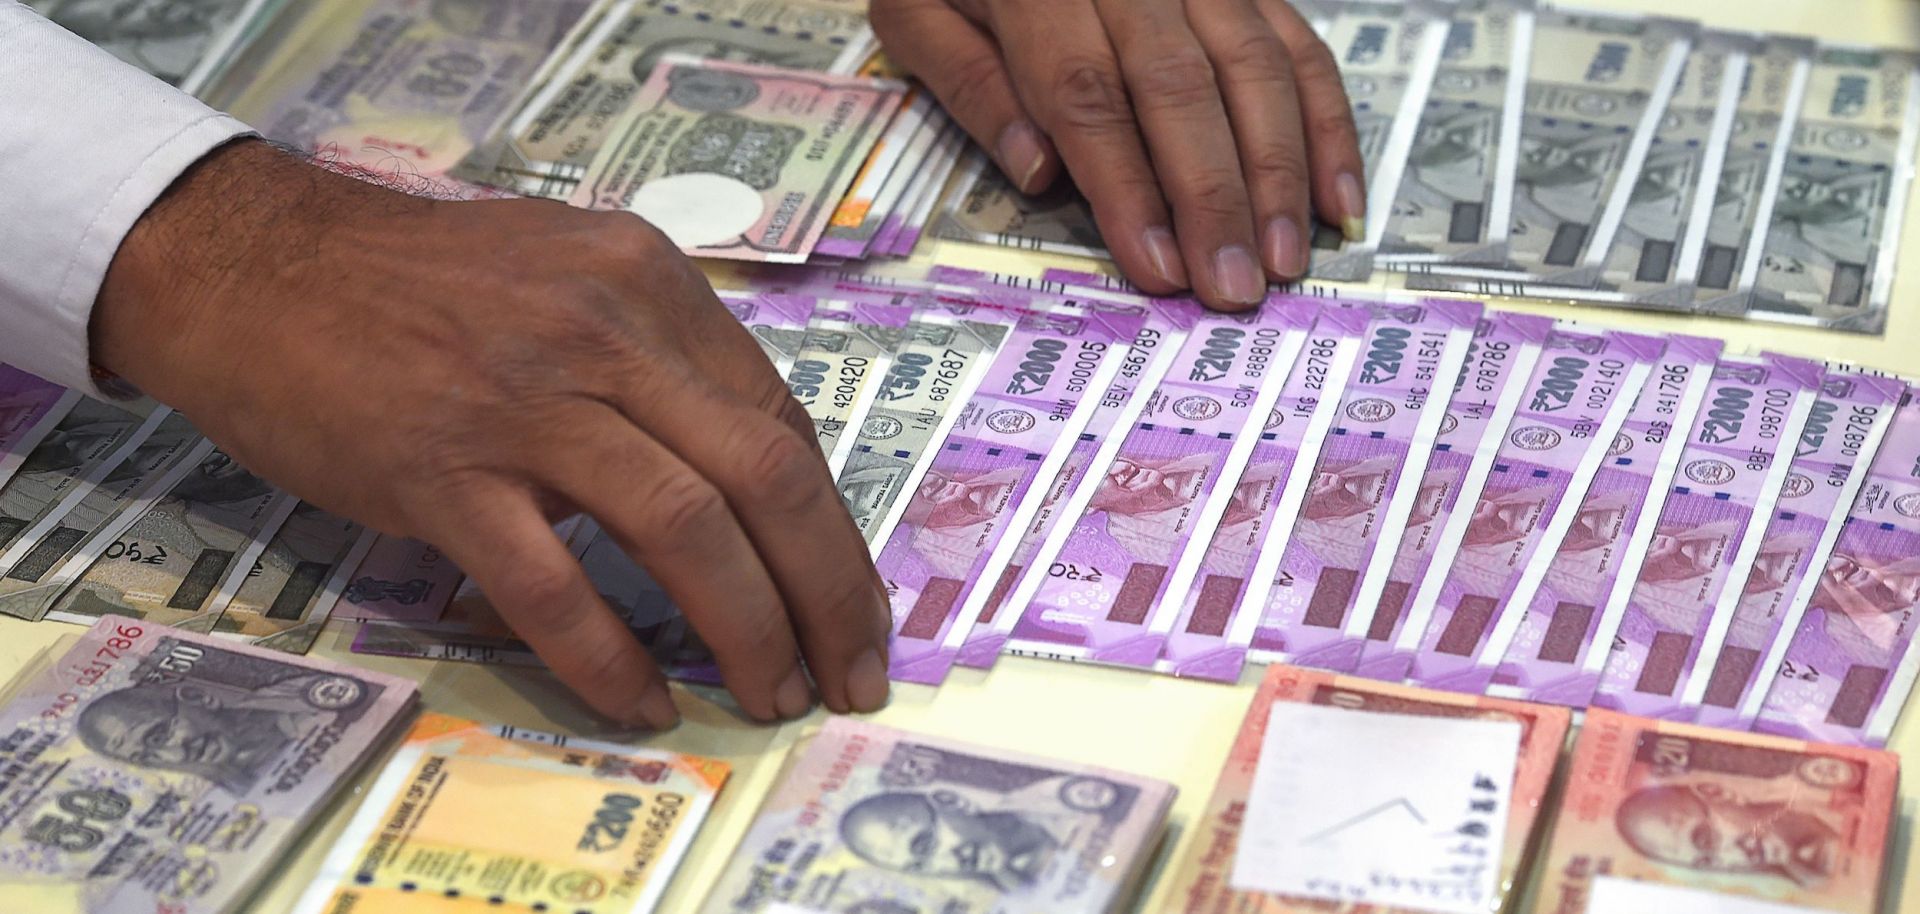 A numismatist in India displays bank notes at an exhibition in Mumbai in late 2017.